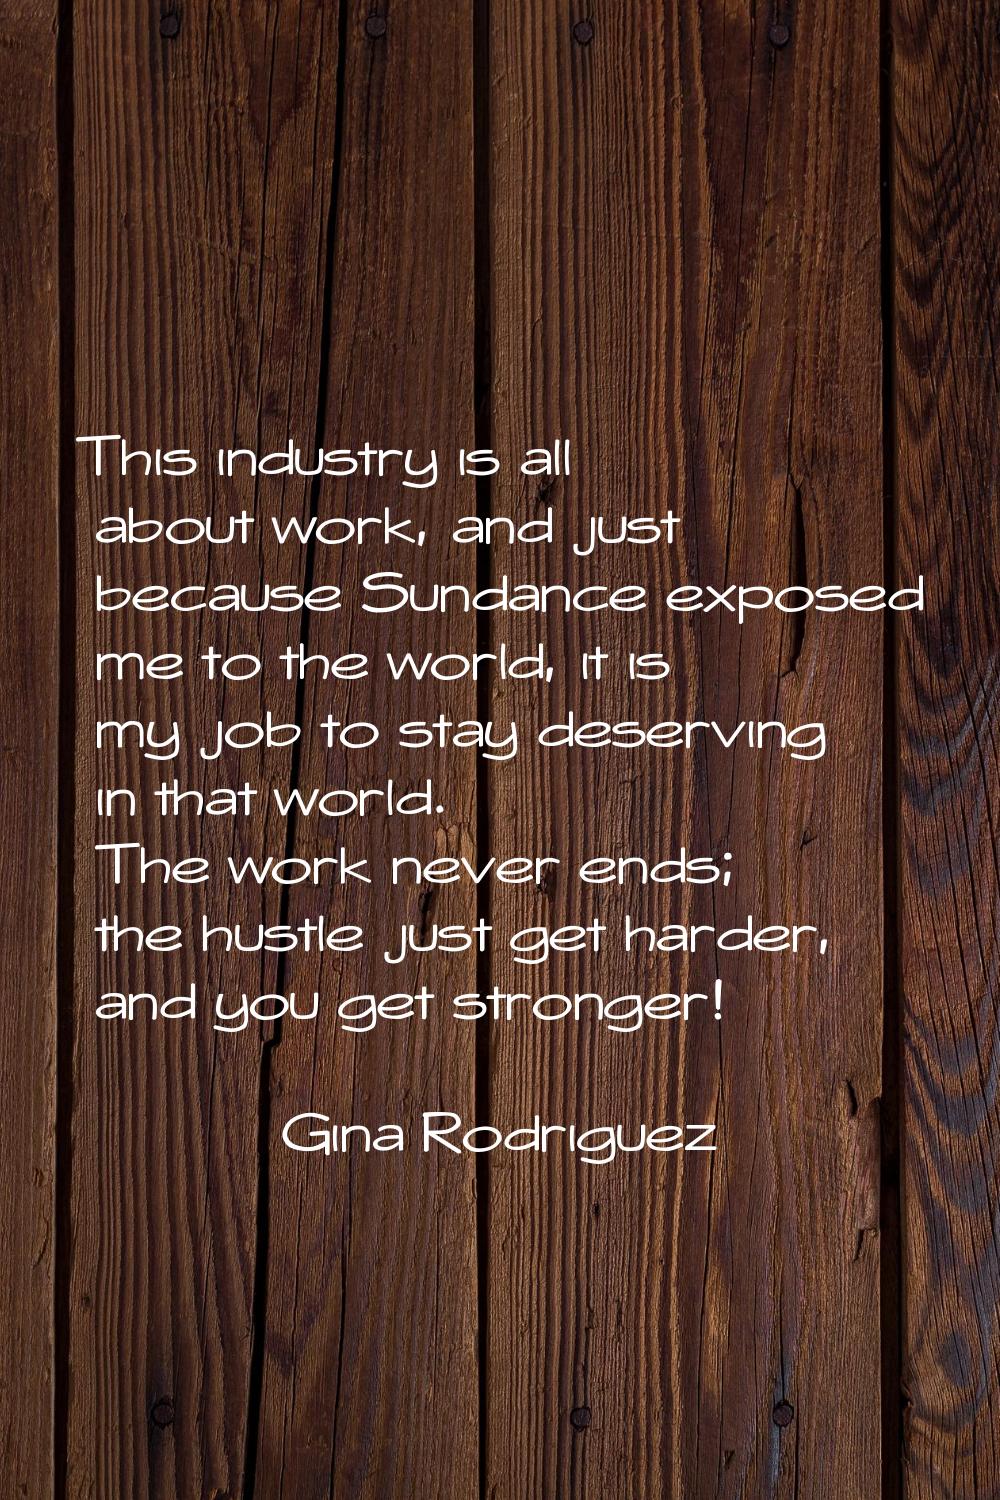 This industry is all about work, and just because Sundance exposed me to the world, it is my job to